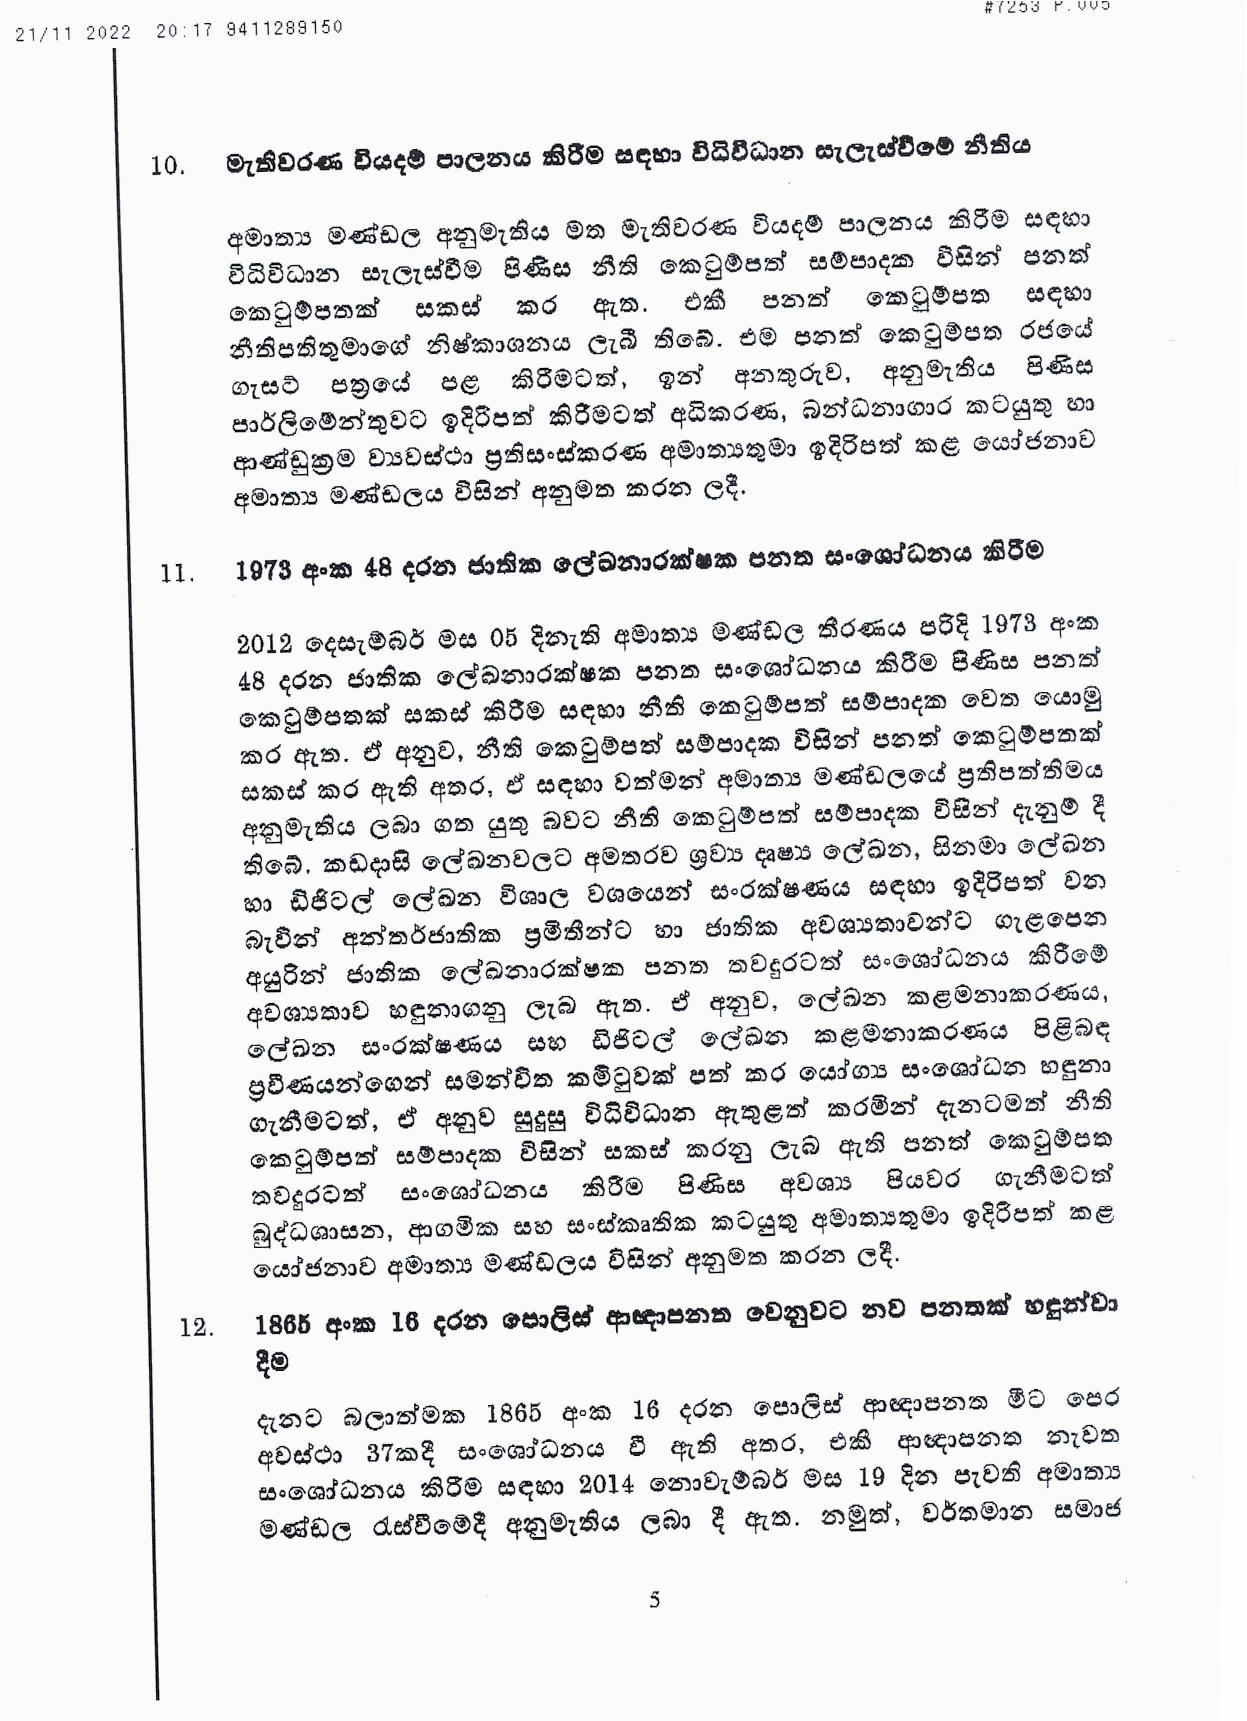 Cabinet Decision on 21.11.2022 page 005